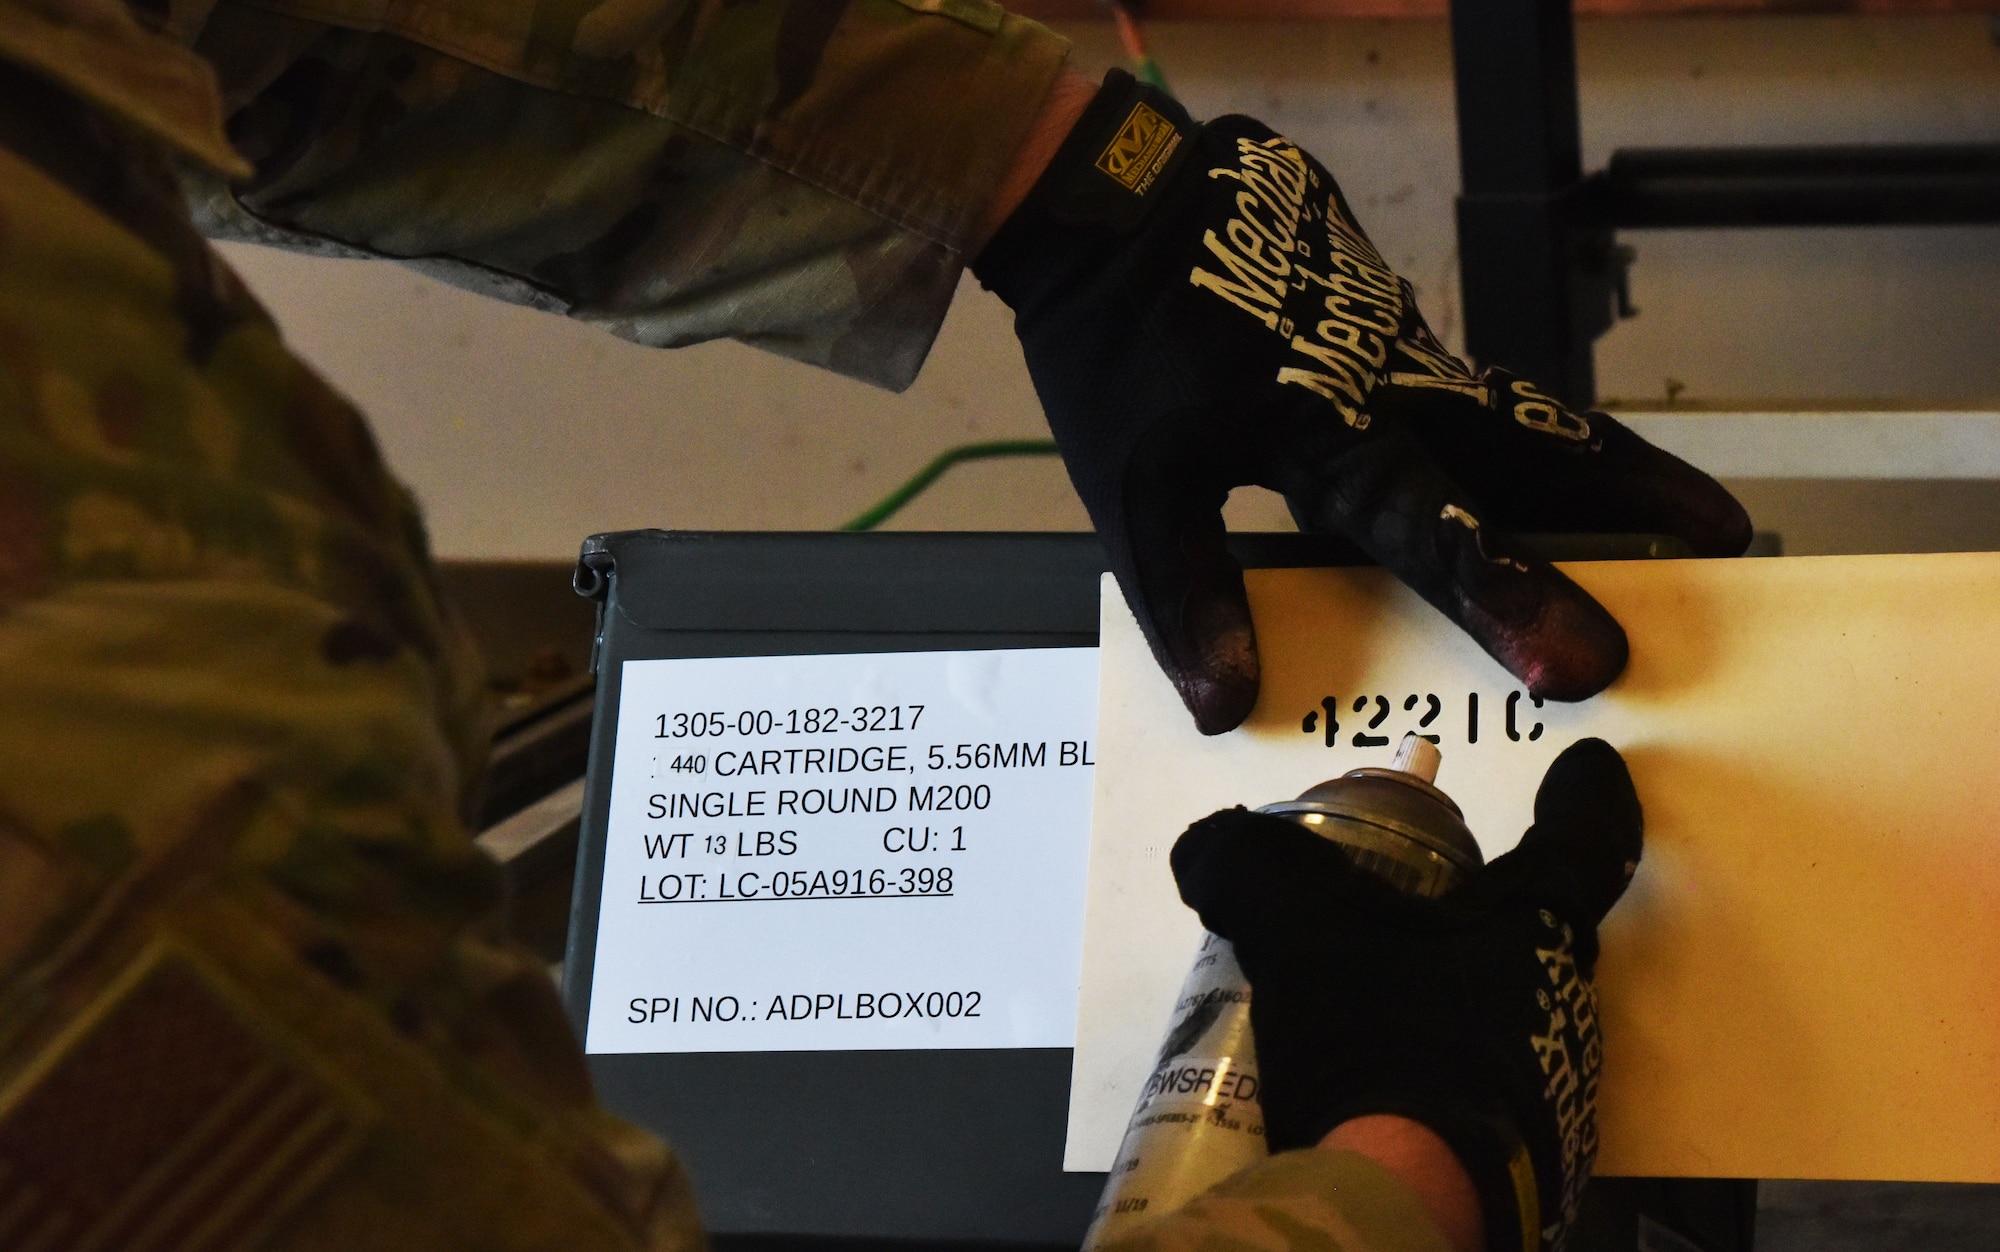 An Ammo Airman from the 341st Munitions Squadron marks an ammo can with the appropriate unit designation before issuing July 6, 2021, at Malmstrom Air Force Base, Mont. Munitions Airmen store, maintain, inventory and issue explosive materials for use by other units on the base. (U.S. Air Force photo by Tech. Sgt. Joseph Park)